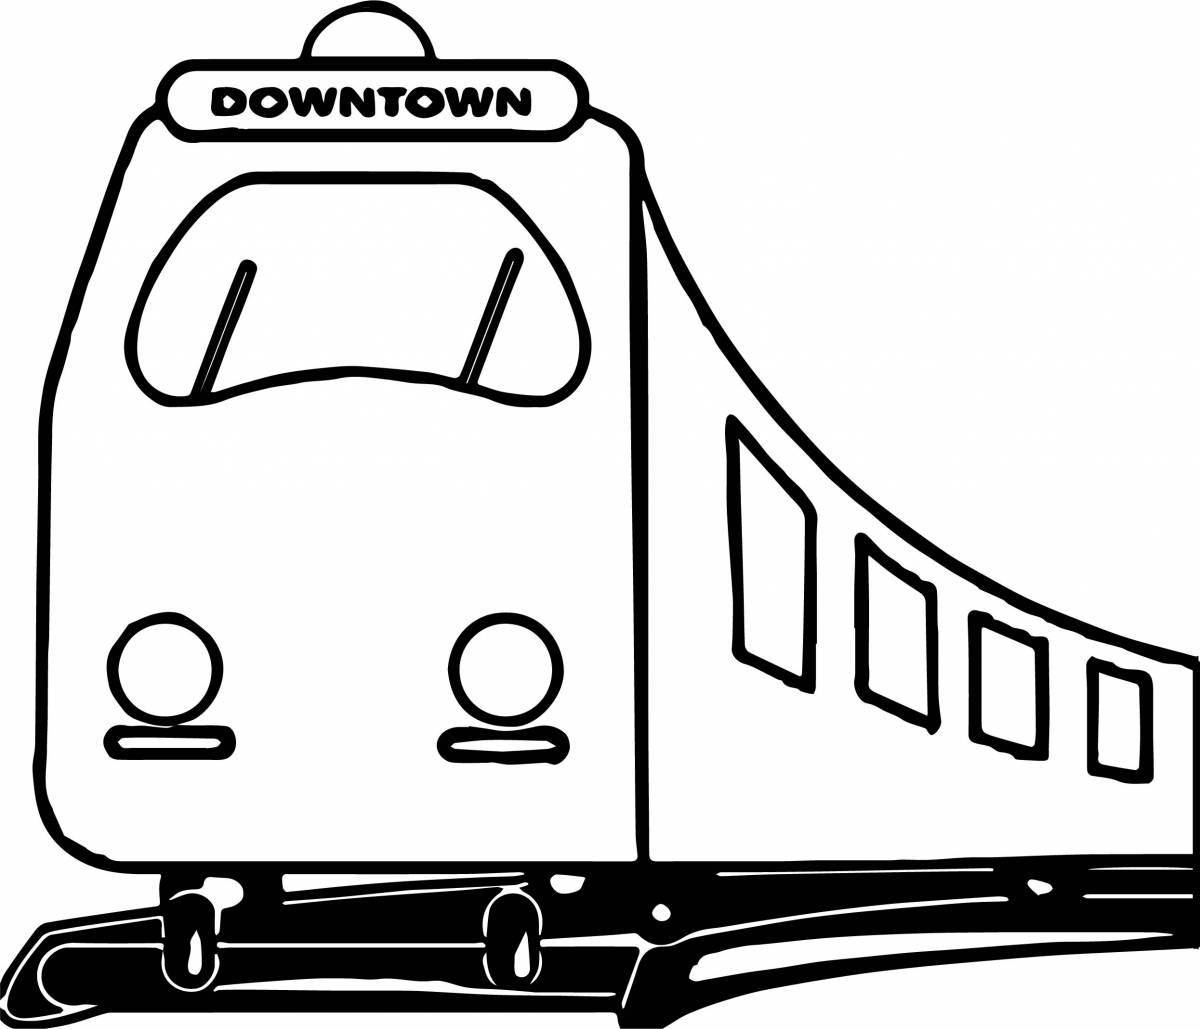 Colorful train station coloring page for kids